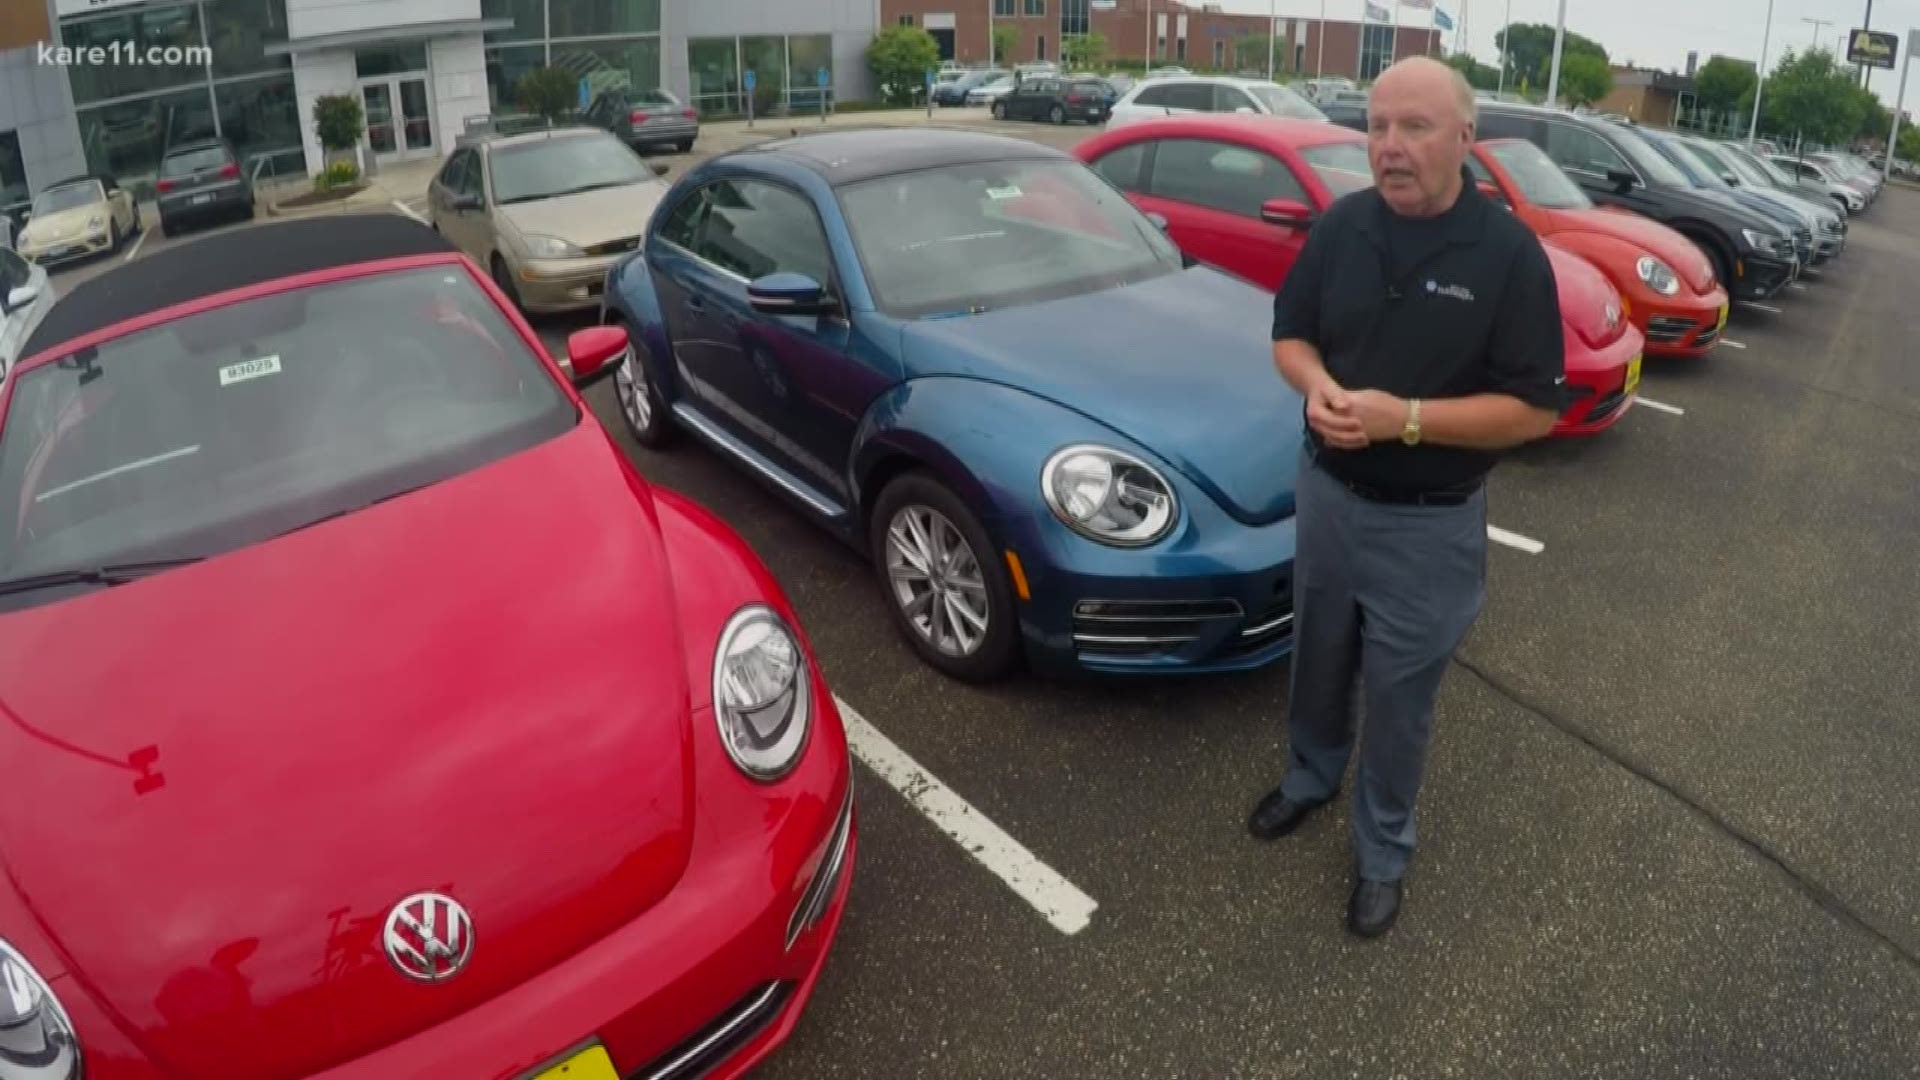 The VW Beetle has a big following in our area. The Twin Cities Volkswagen Club boasts 180 members.